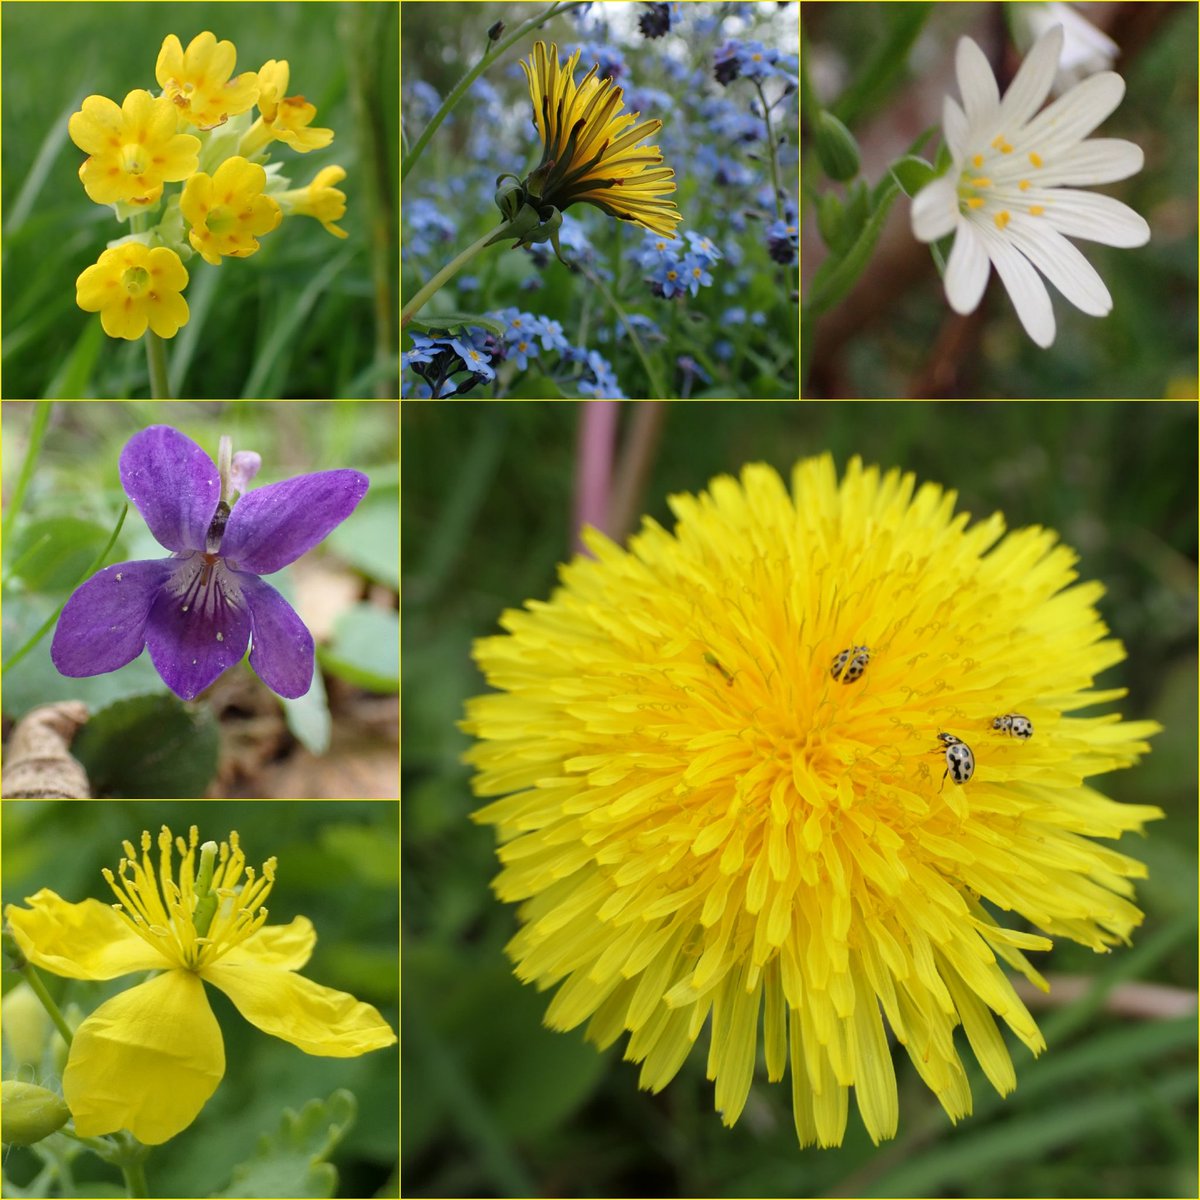 Happy ##WildFlowerHour #Cowslip challenge accepted 😁 #Dandelions, stitchwort, violet, greater celandine, forget me not, and having a party in the Dandelions today were lots of tiny 16 spot ladybirds.